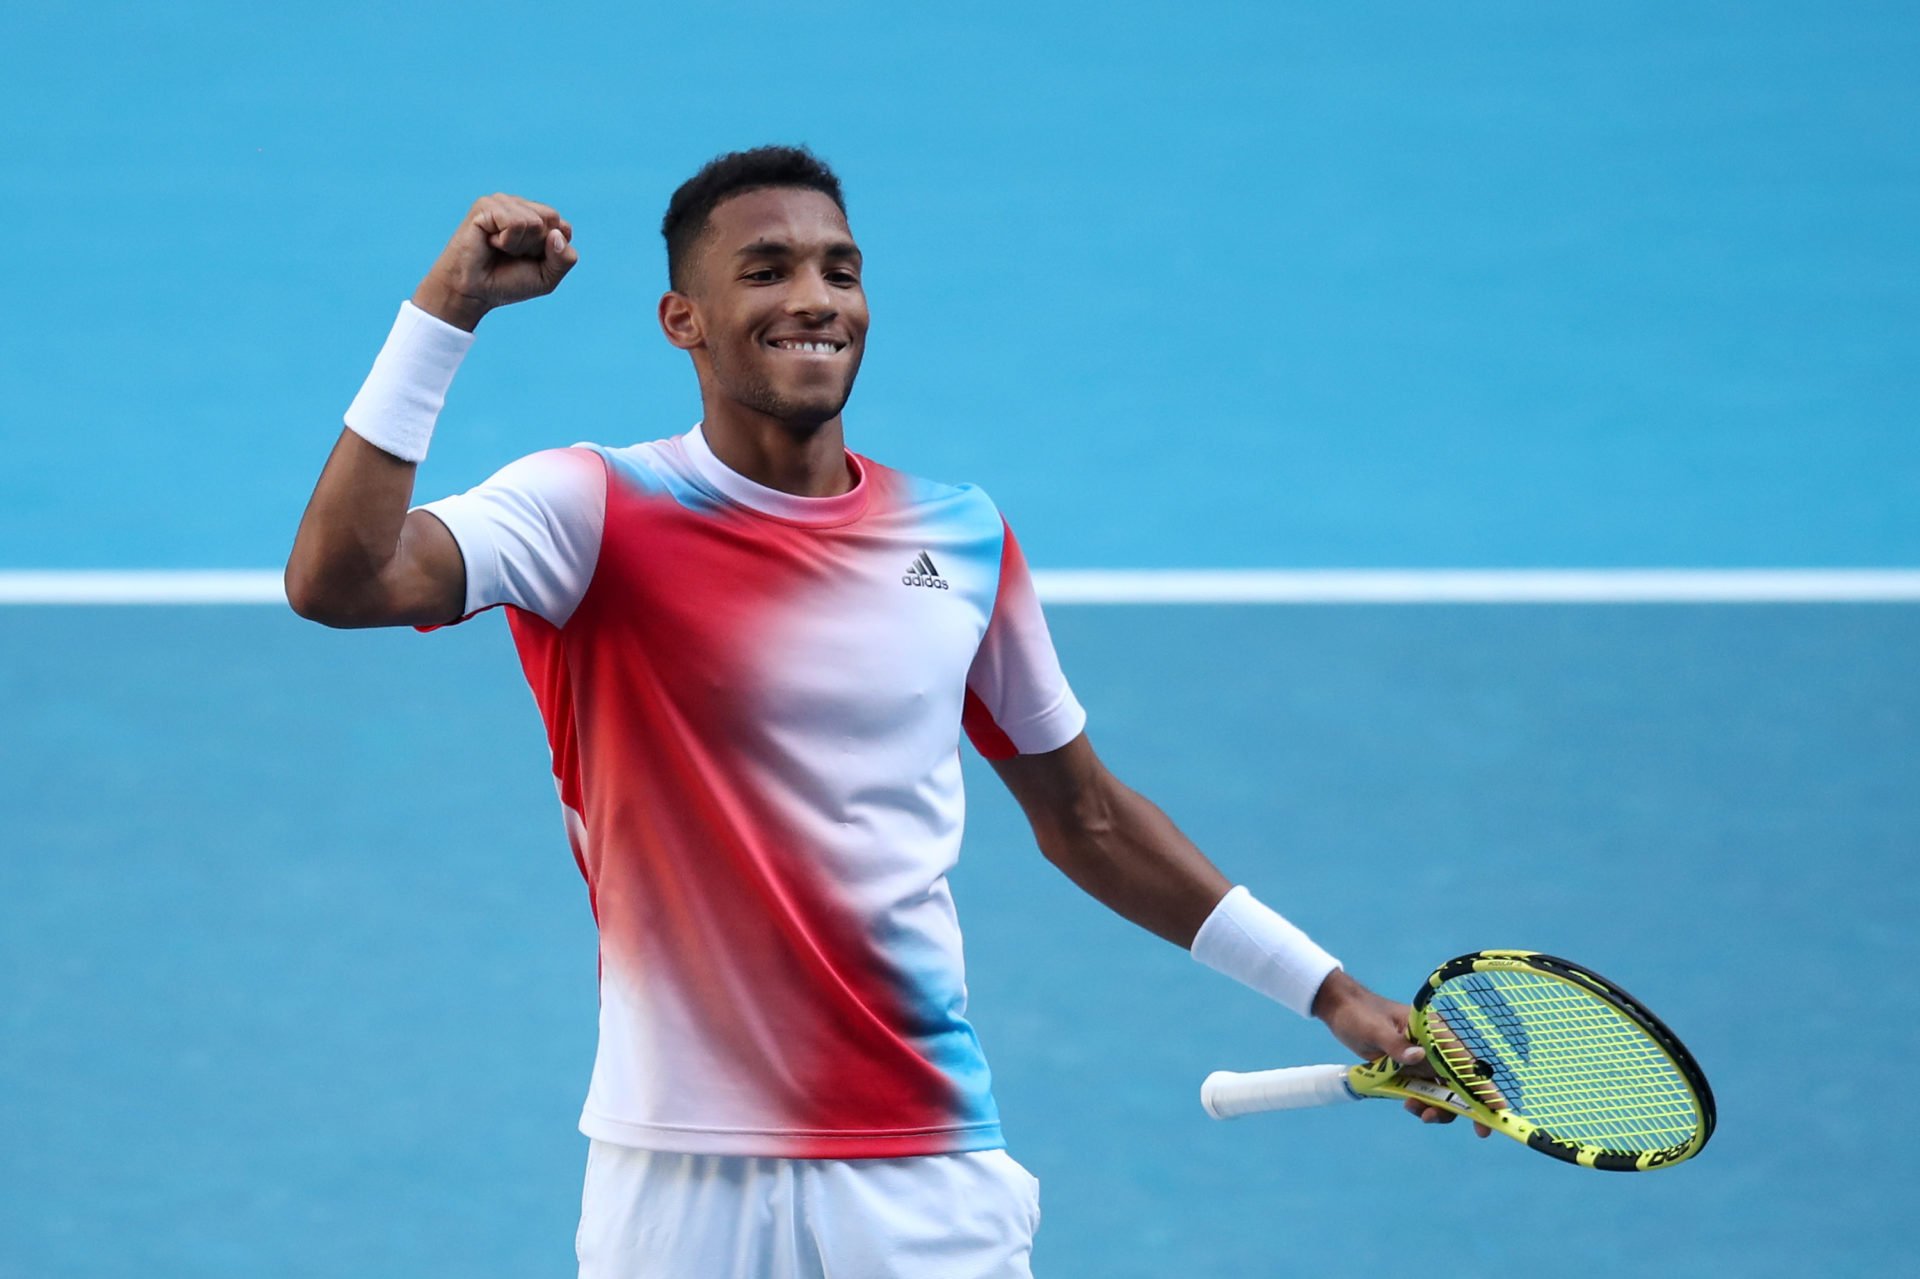 Who are Felix Auger Aliassime's parents, Sam and Marie?